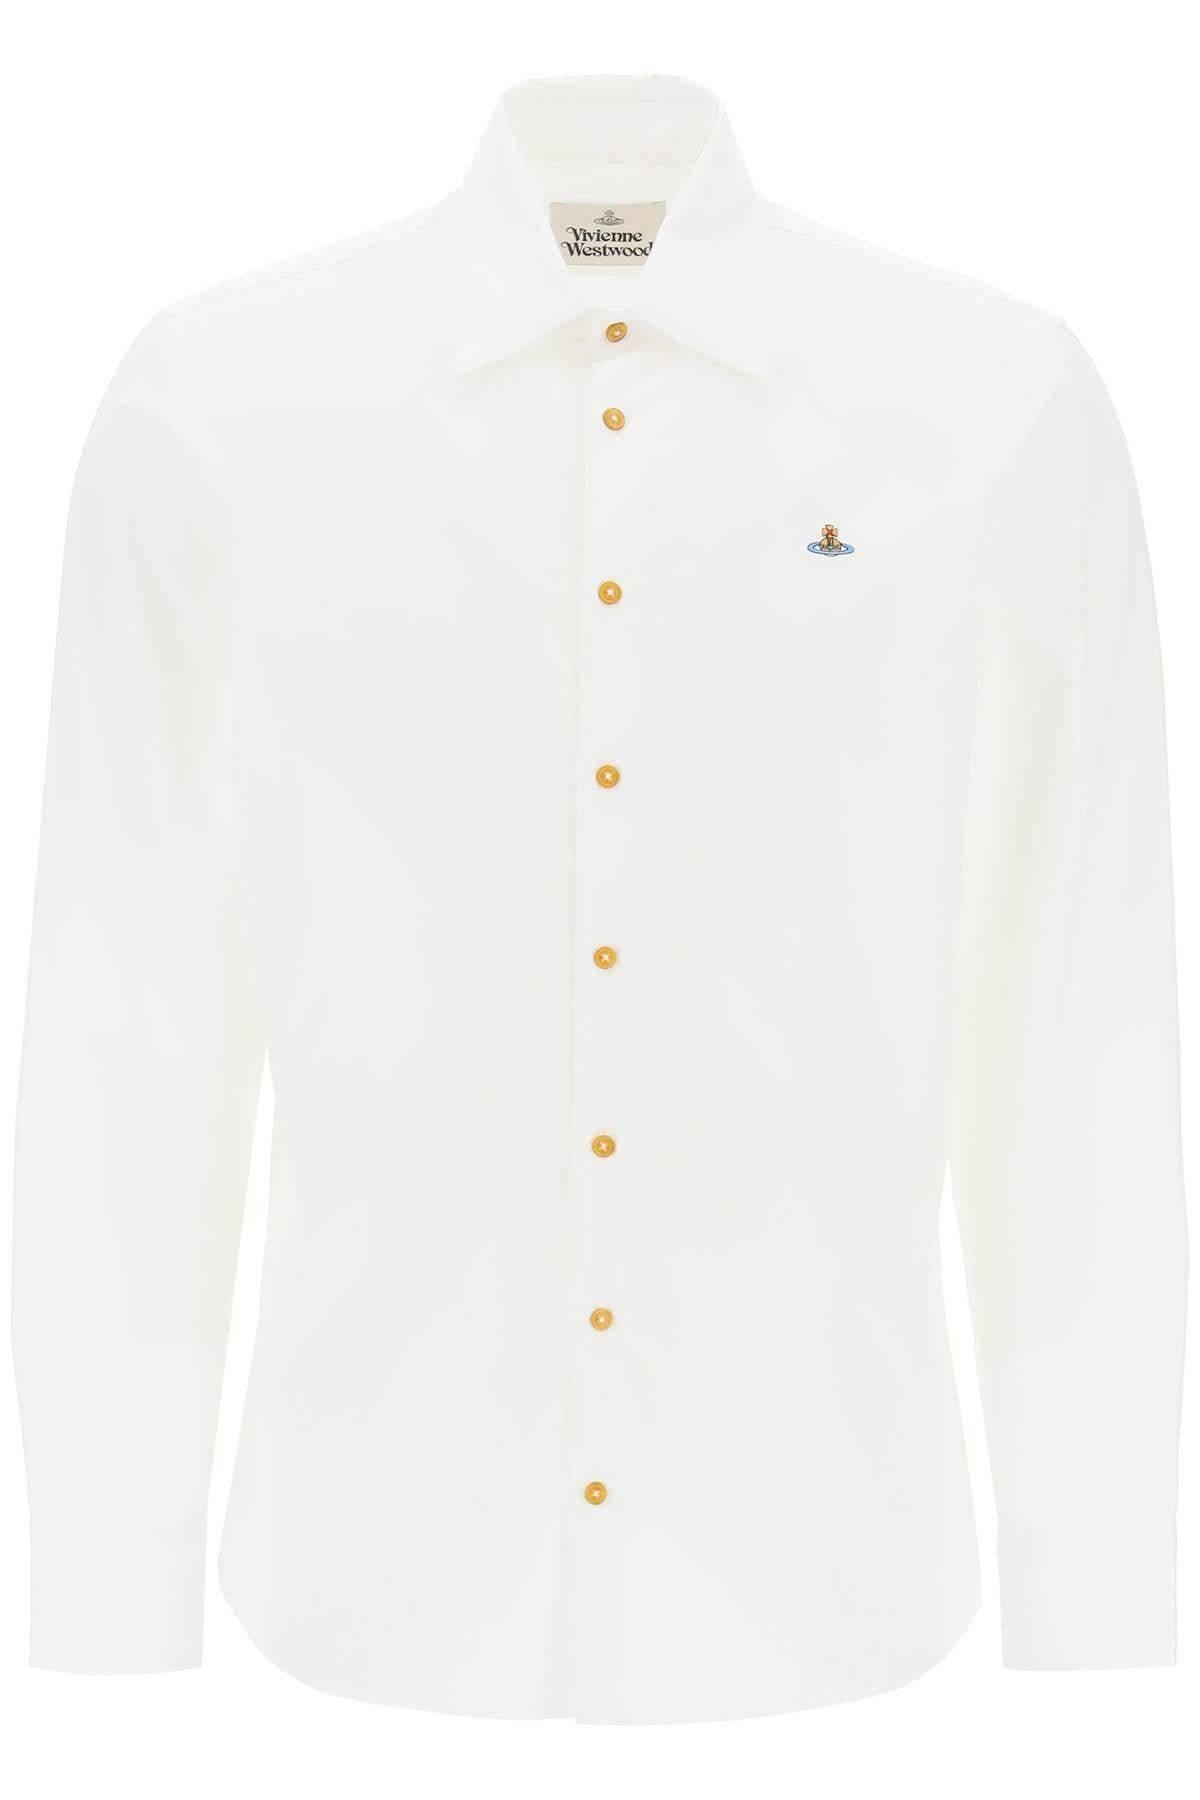 Vivienne Westwood Ghost Shirt With Orb Embroidery - JOHN JULIA